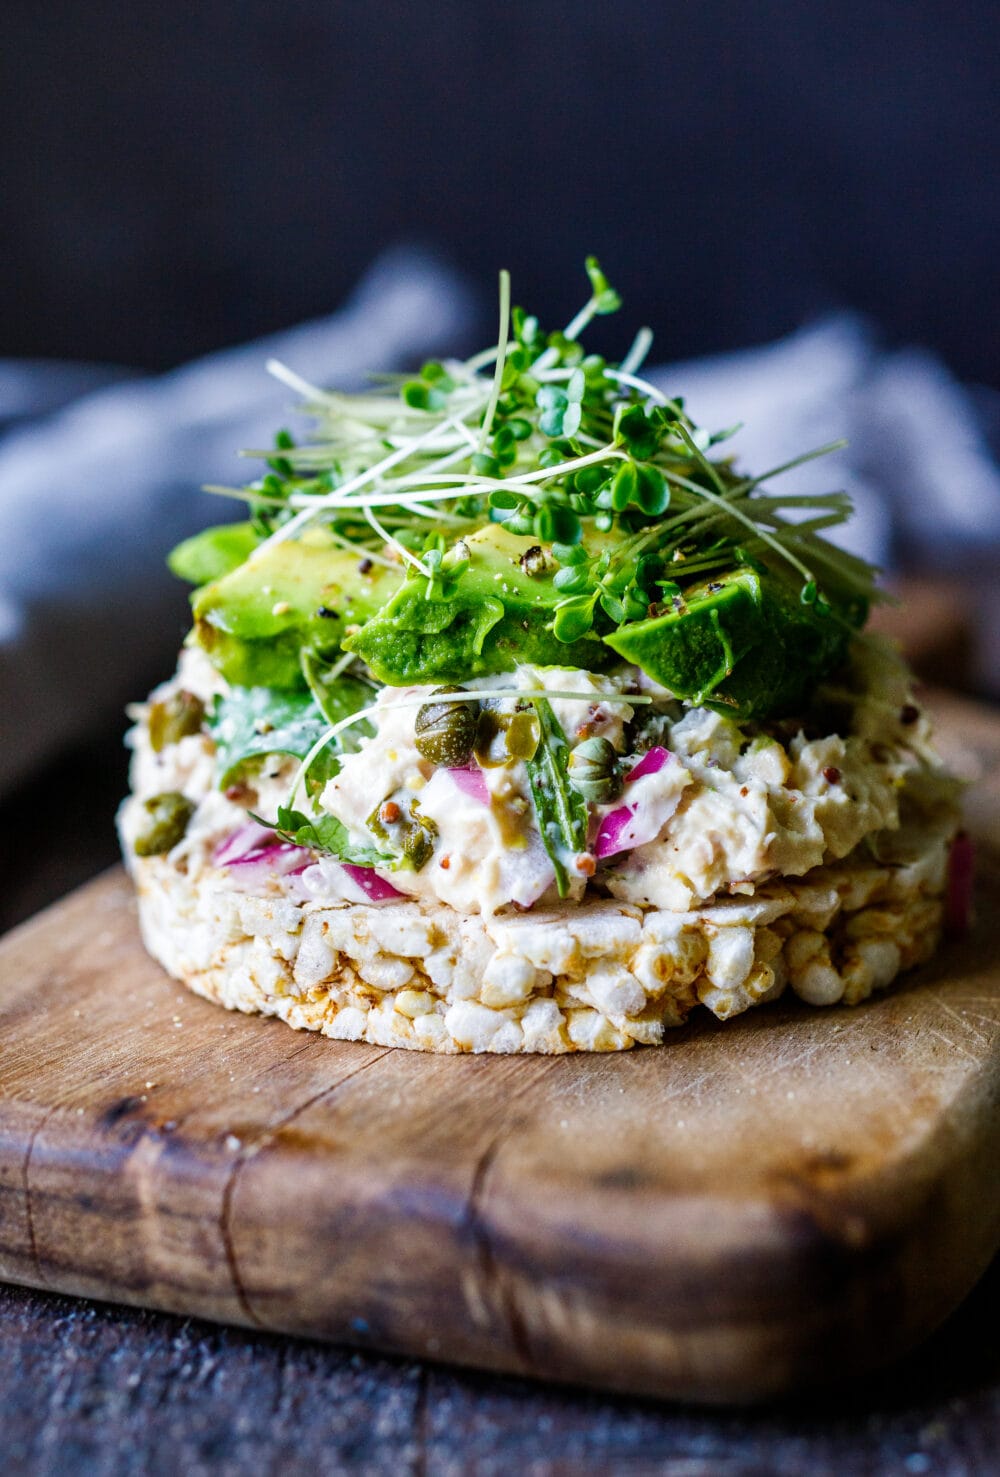 Here's the tastiest recipe for easy, 10-Minute Tuna Salad - with a few variations, that can be served over rice crisps, salad greens, in tortillas or pita bread or in sprouted bread. 